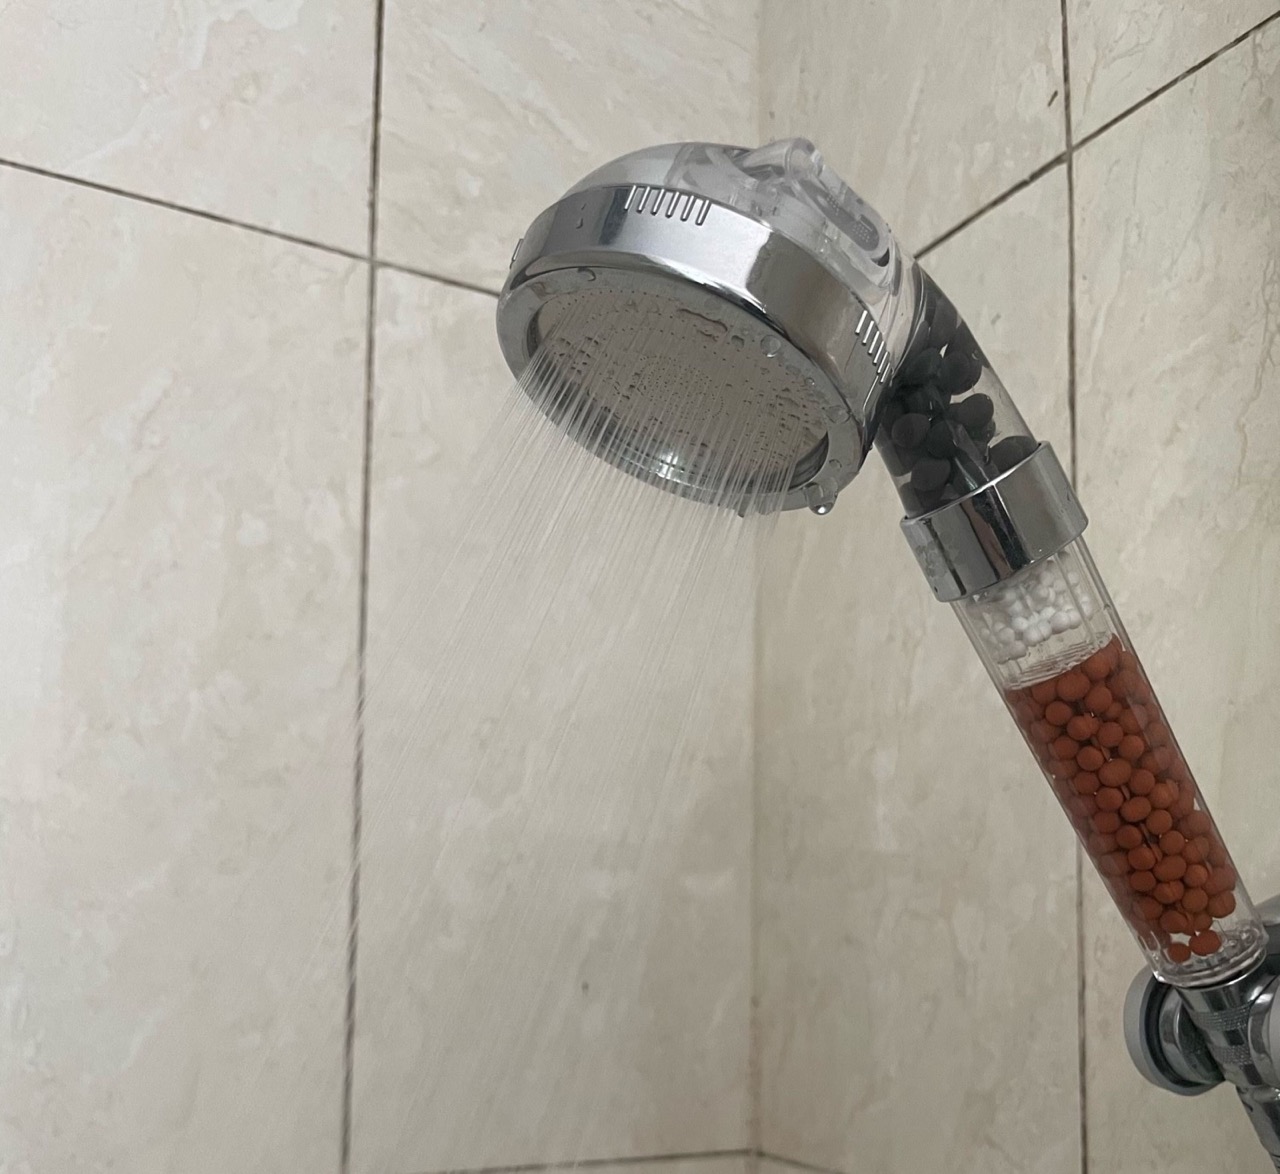 Why Does Showerhead Have Beads In It?